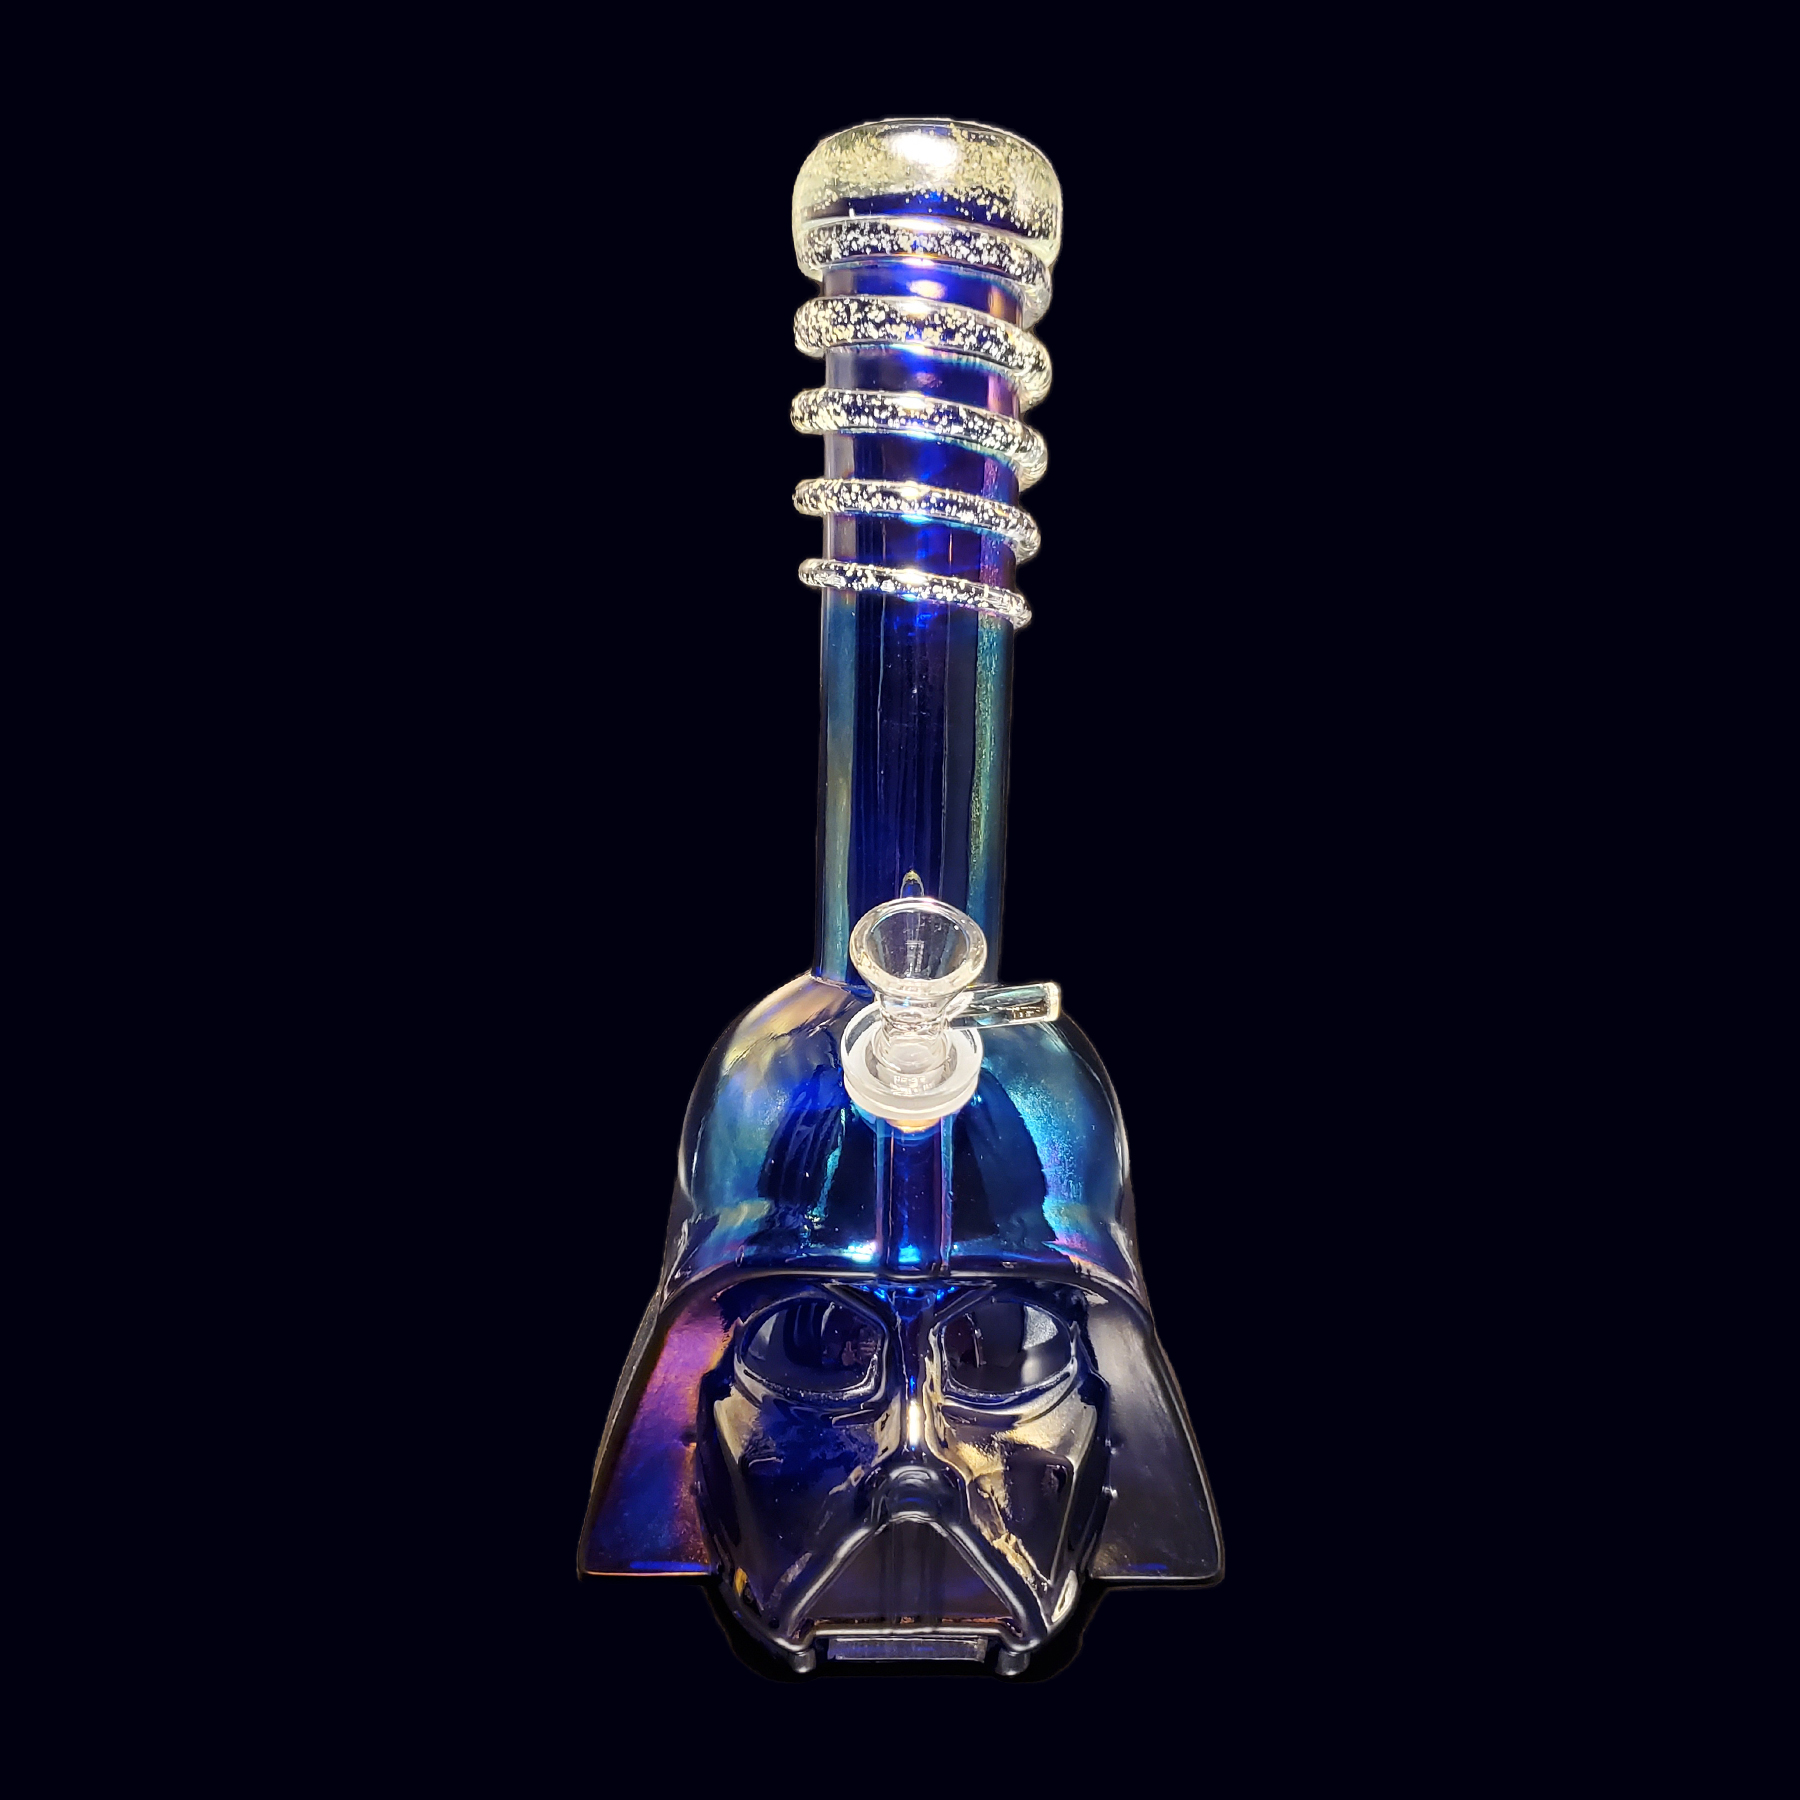 A glass pipe shaped like darth vader.